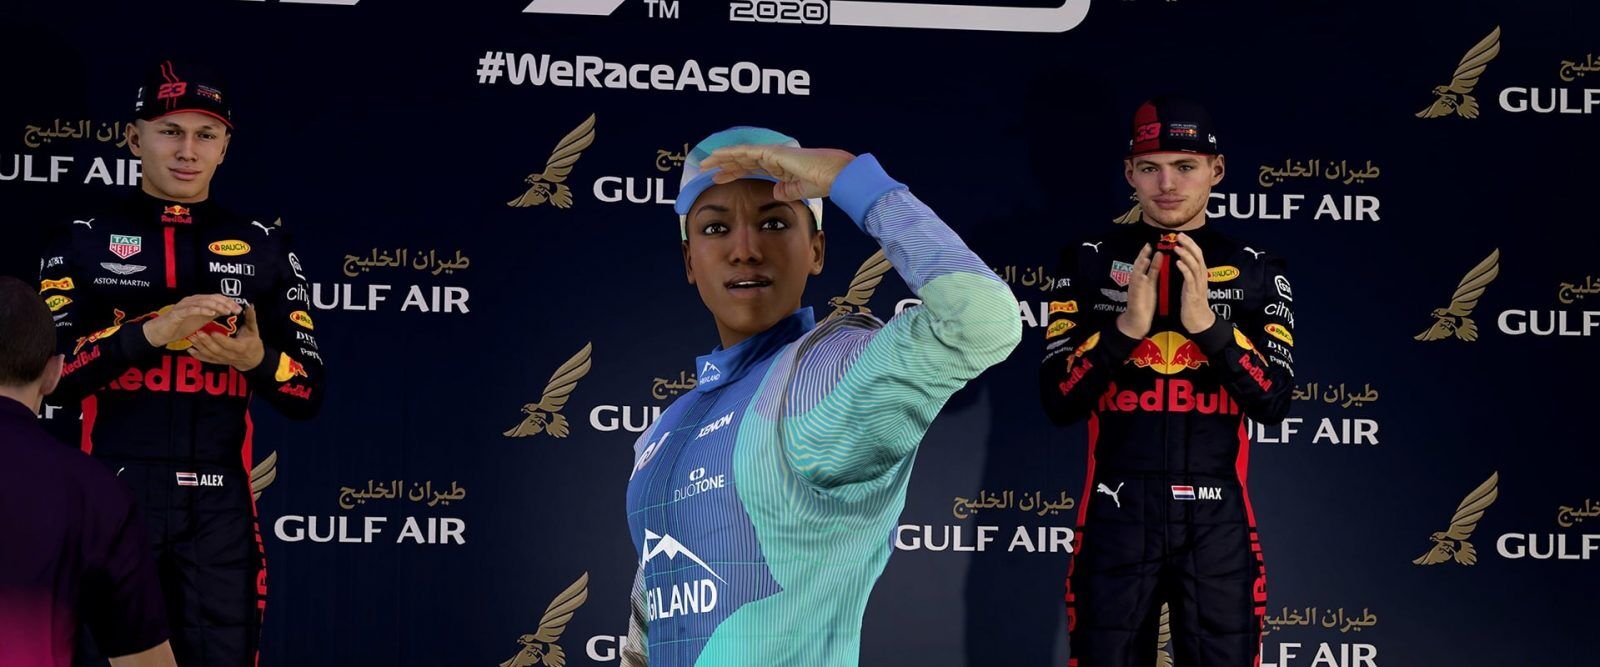 F1 Esports Series features Wildcard to support female racers